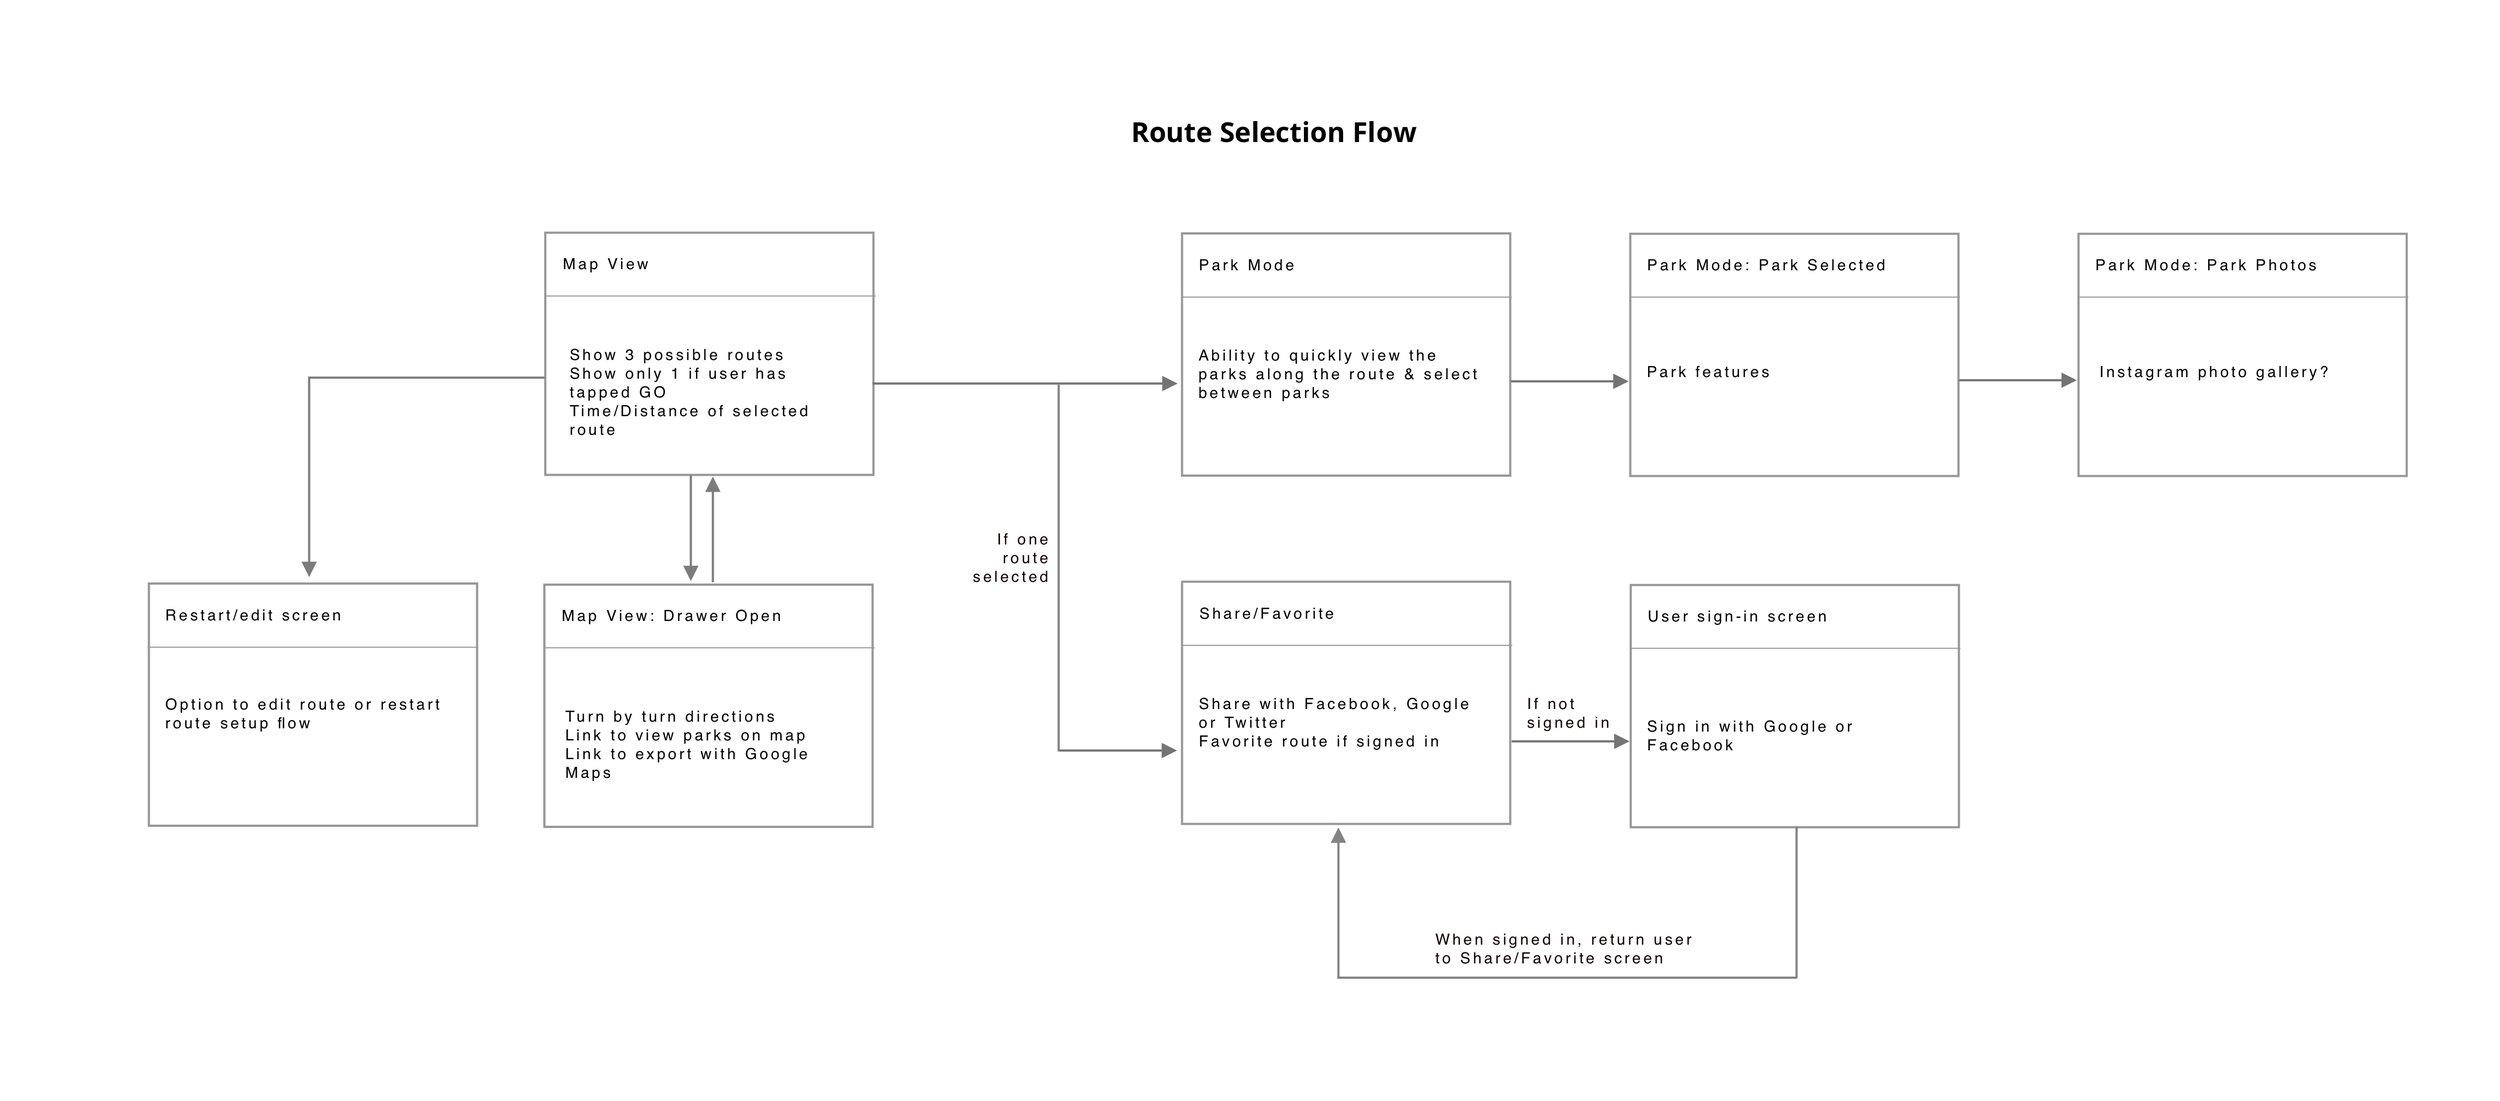 Route Selection Flow.jpg